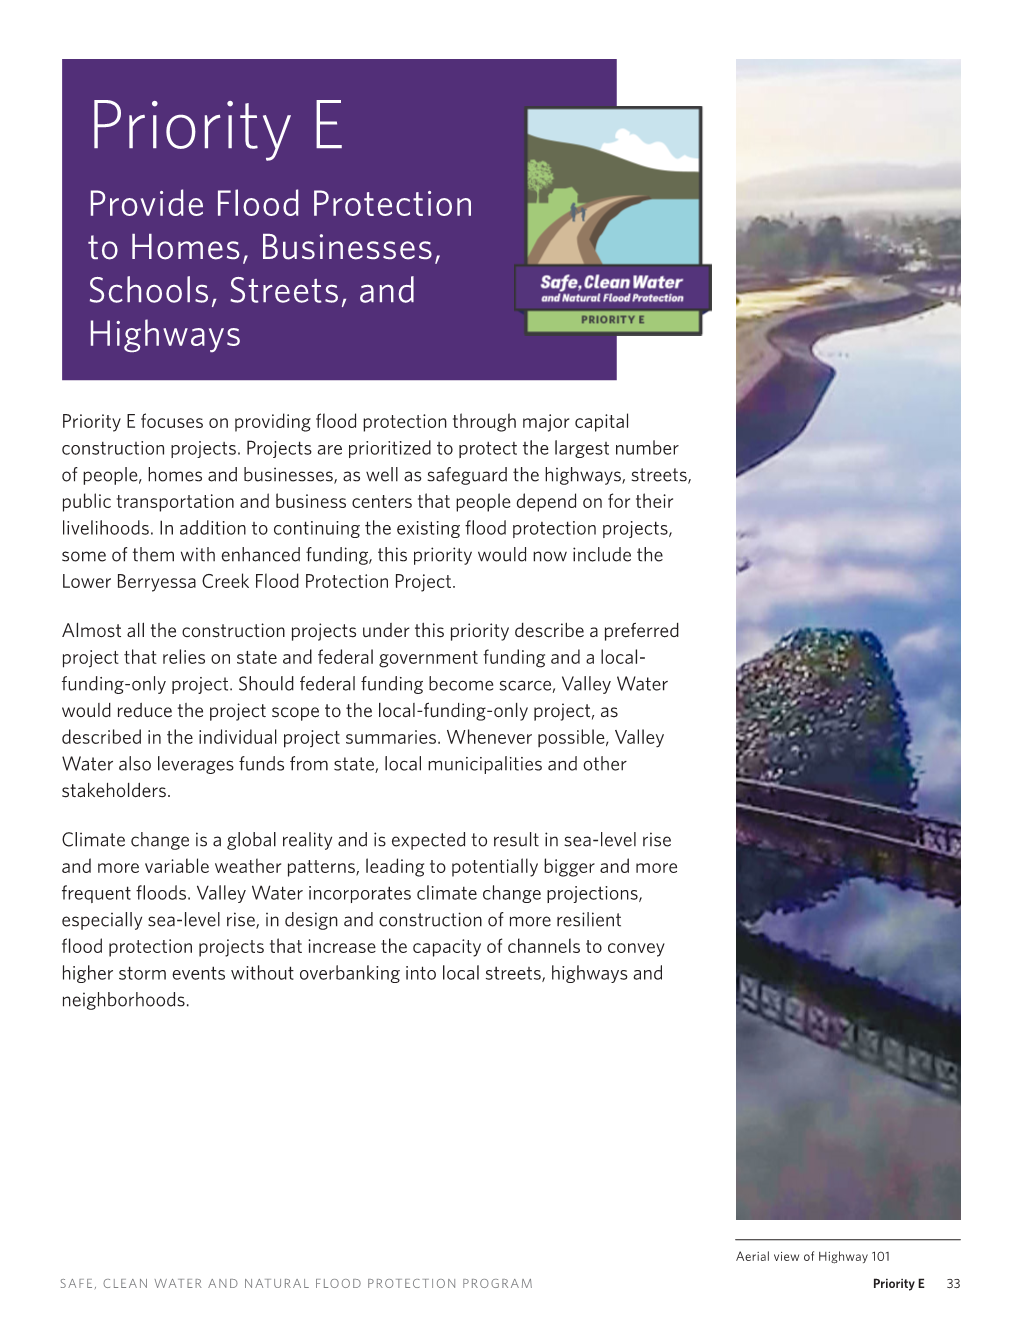 Priority E Provide Flood Protection to Homes, Businesses, Schools, Streets, and Highways